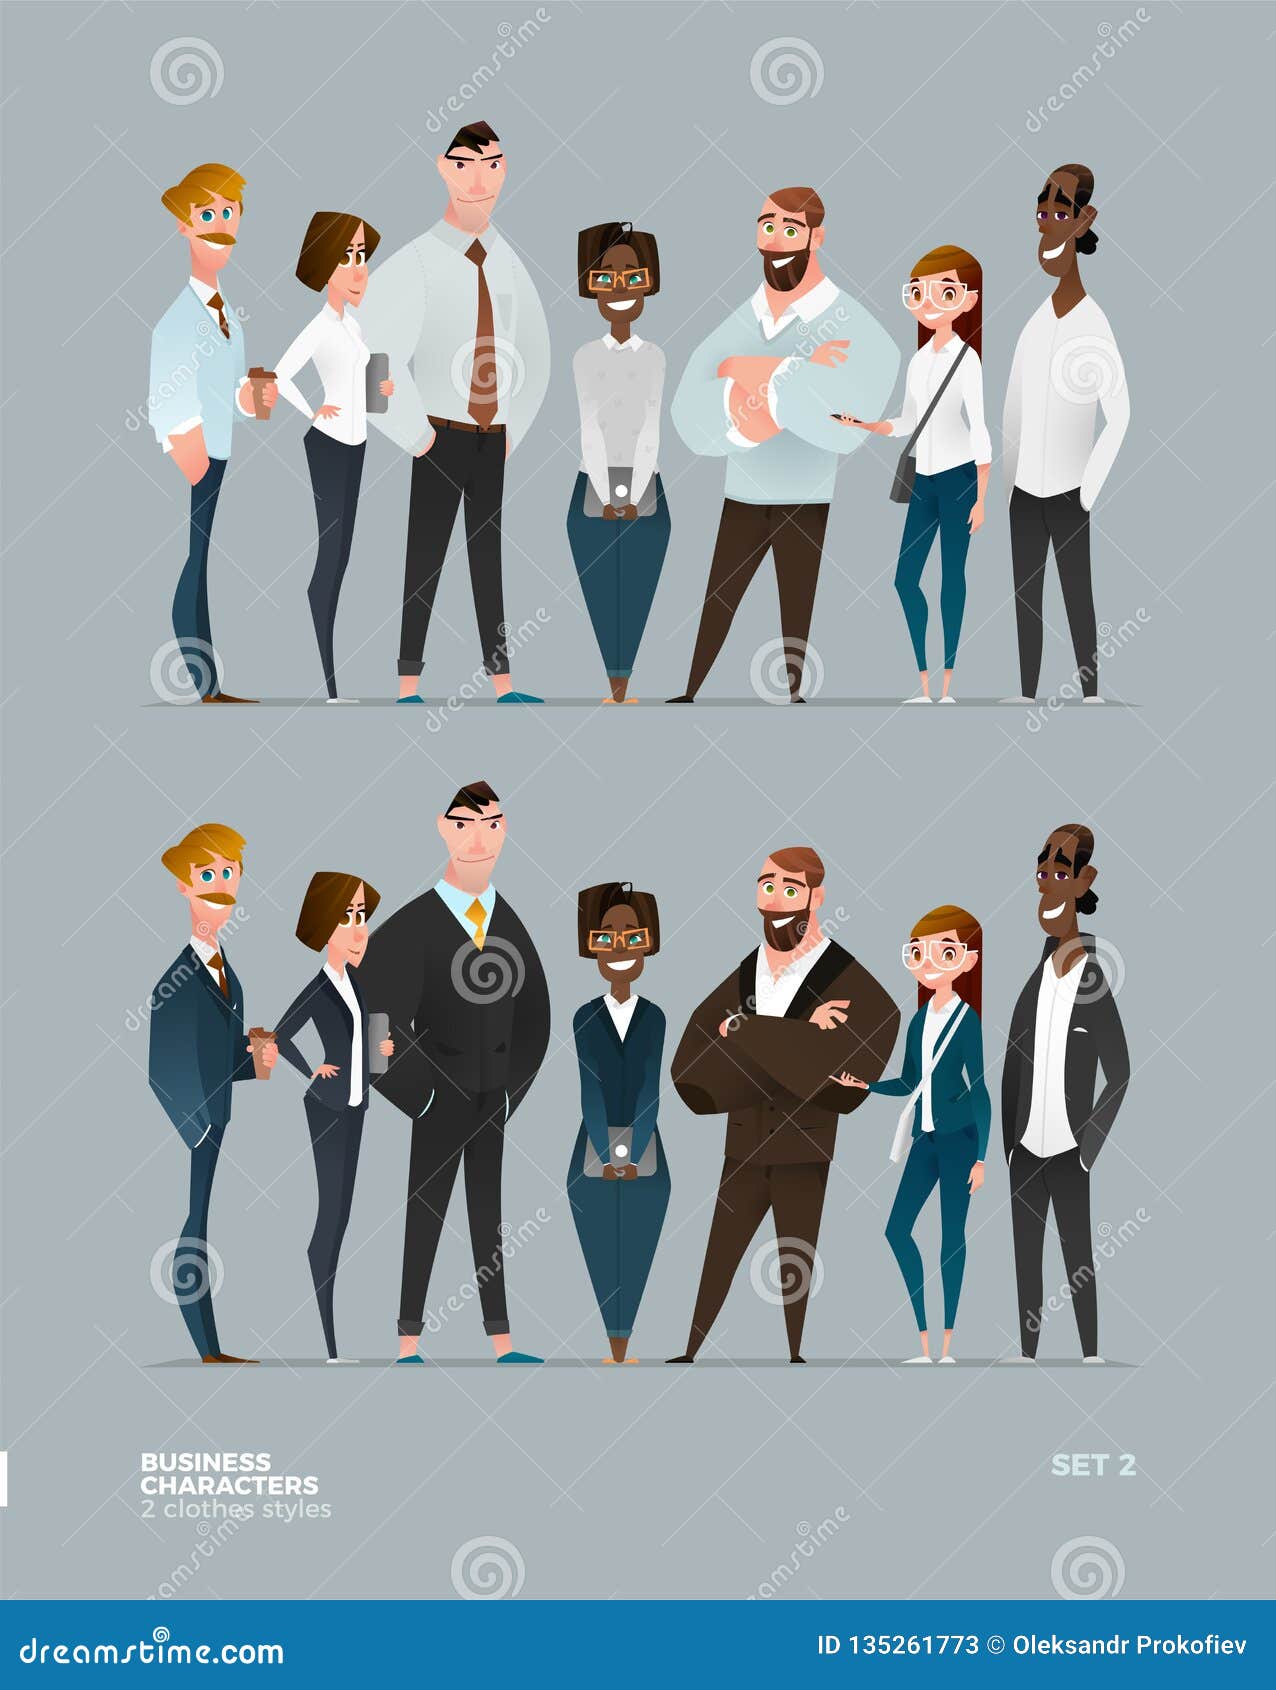 business characters collection